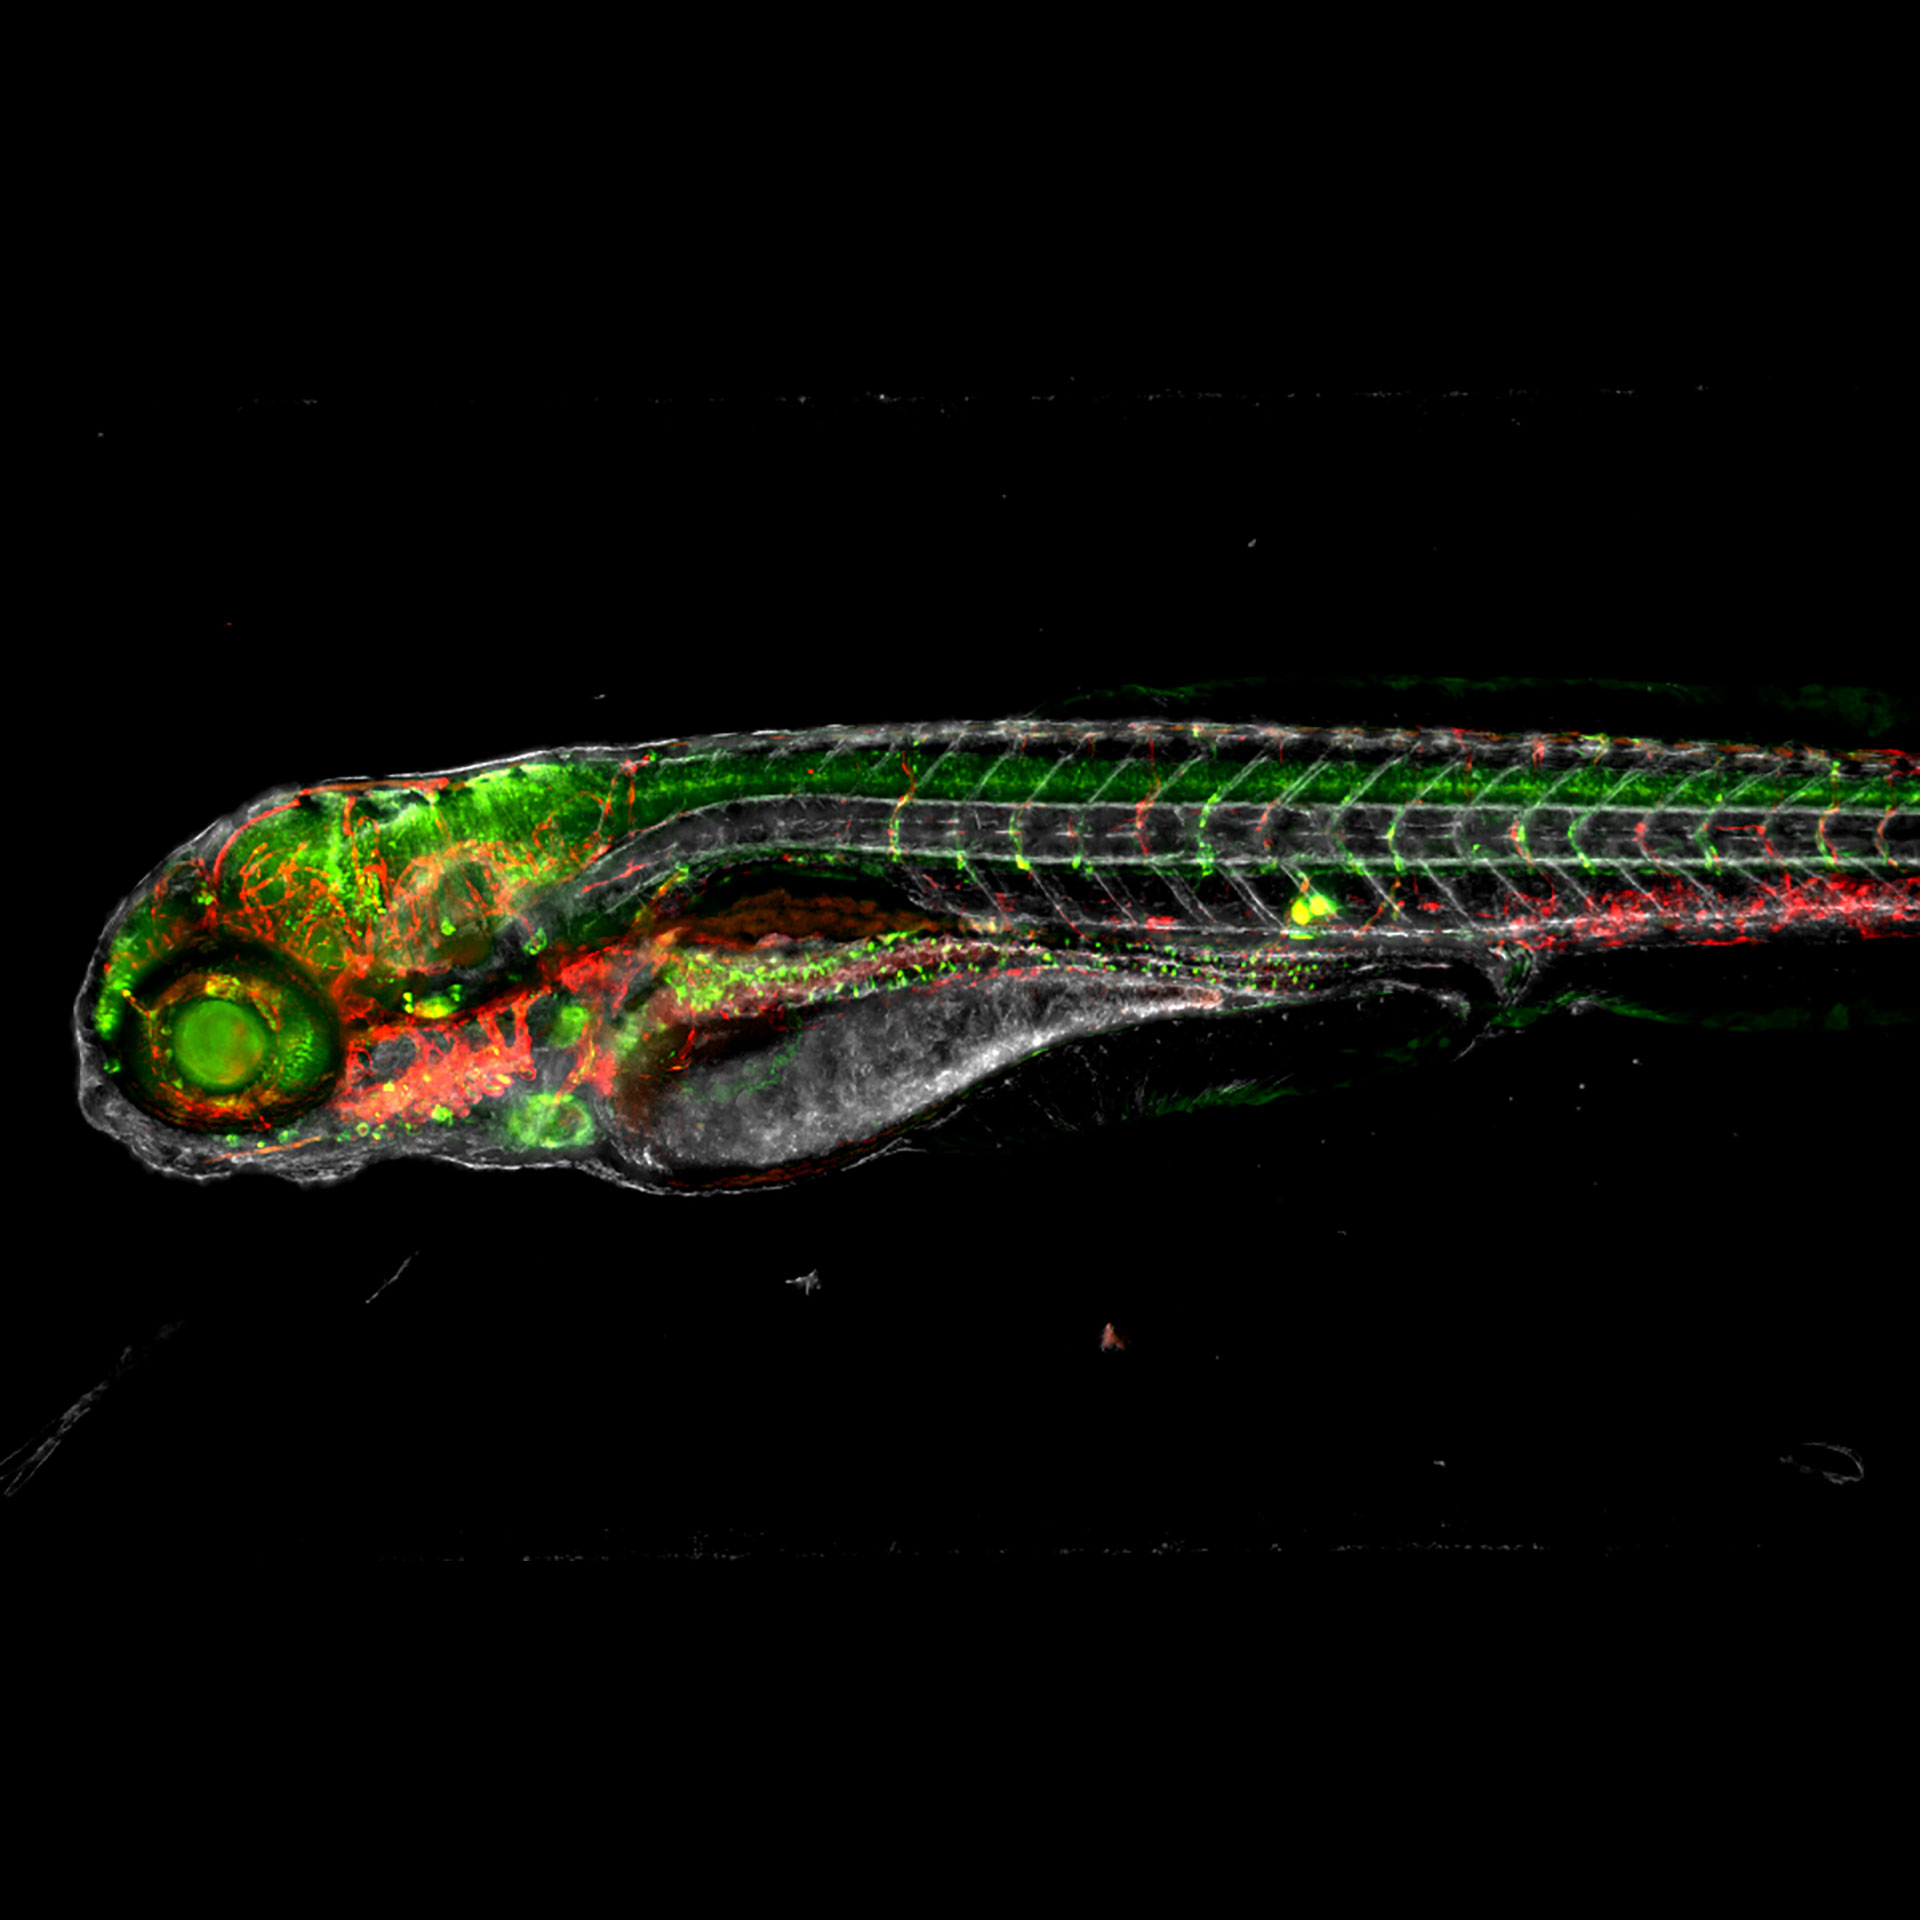 Live imaging of zebrafish embryo from 4 views - view 4 Dr. Lingfei Luo, School of Life Science, Southwest University, China